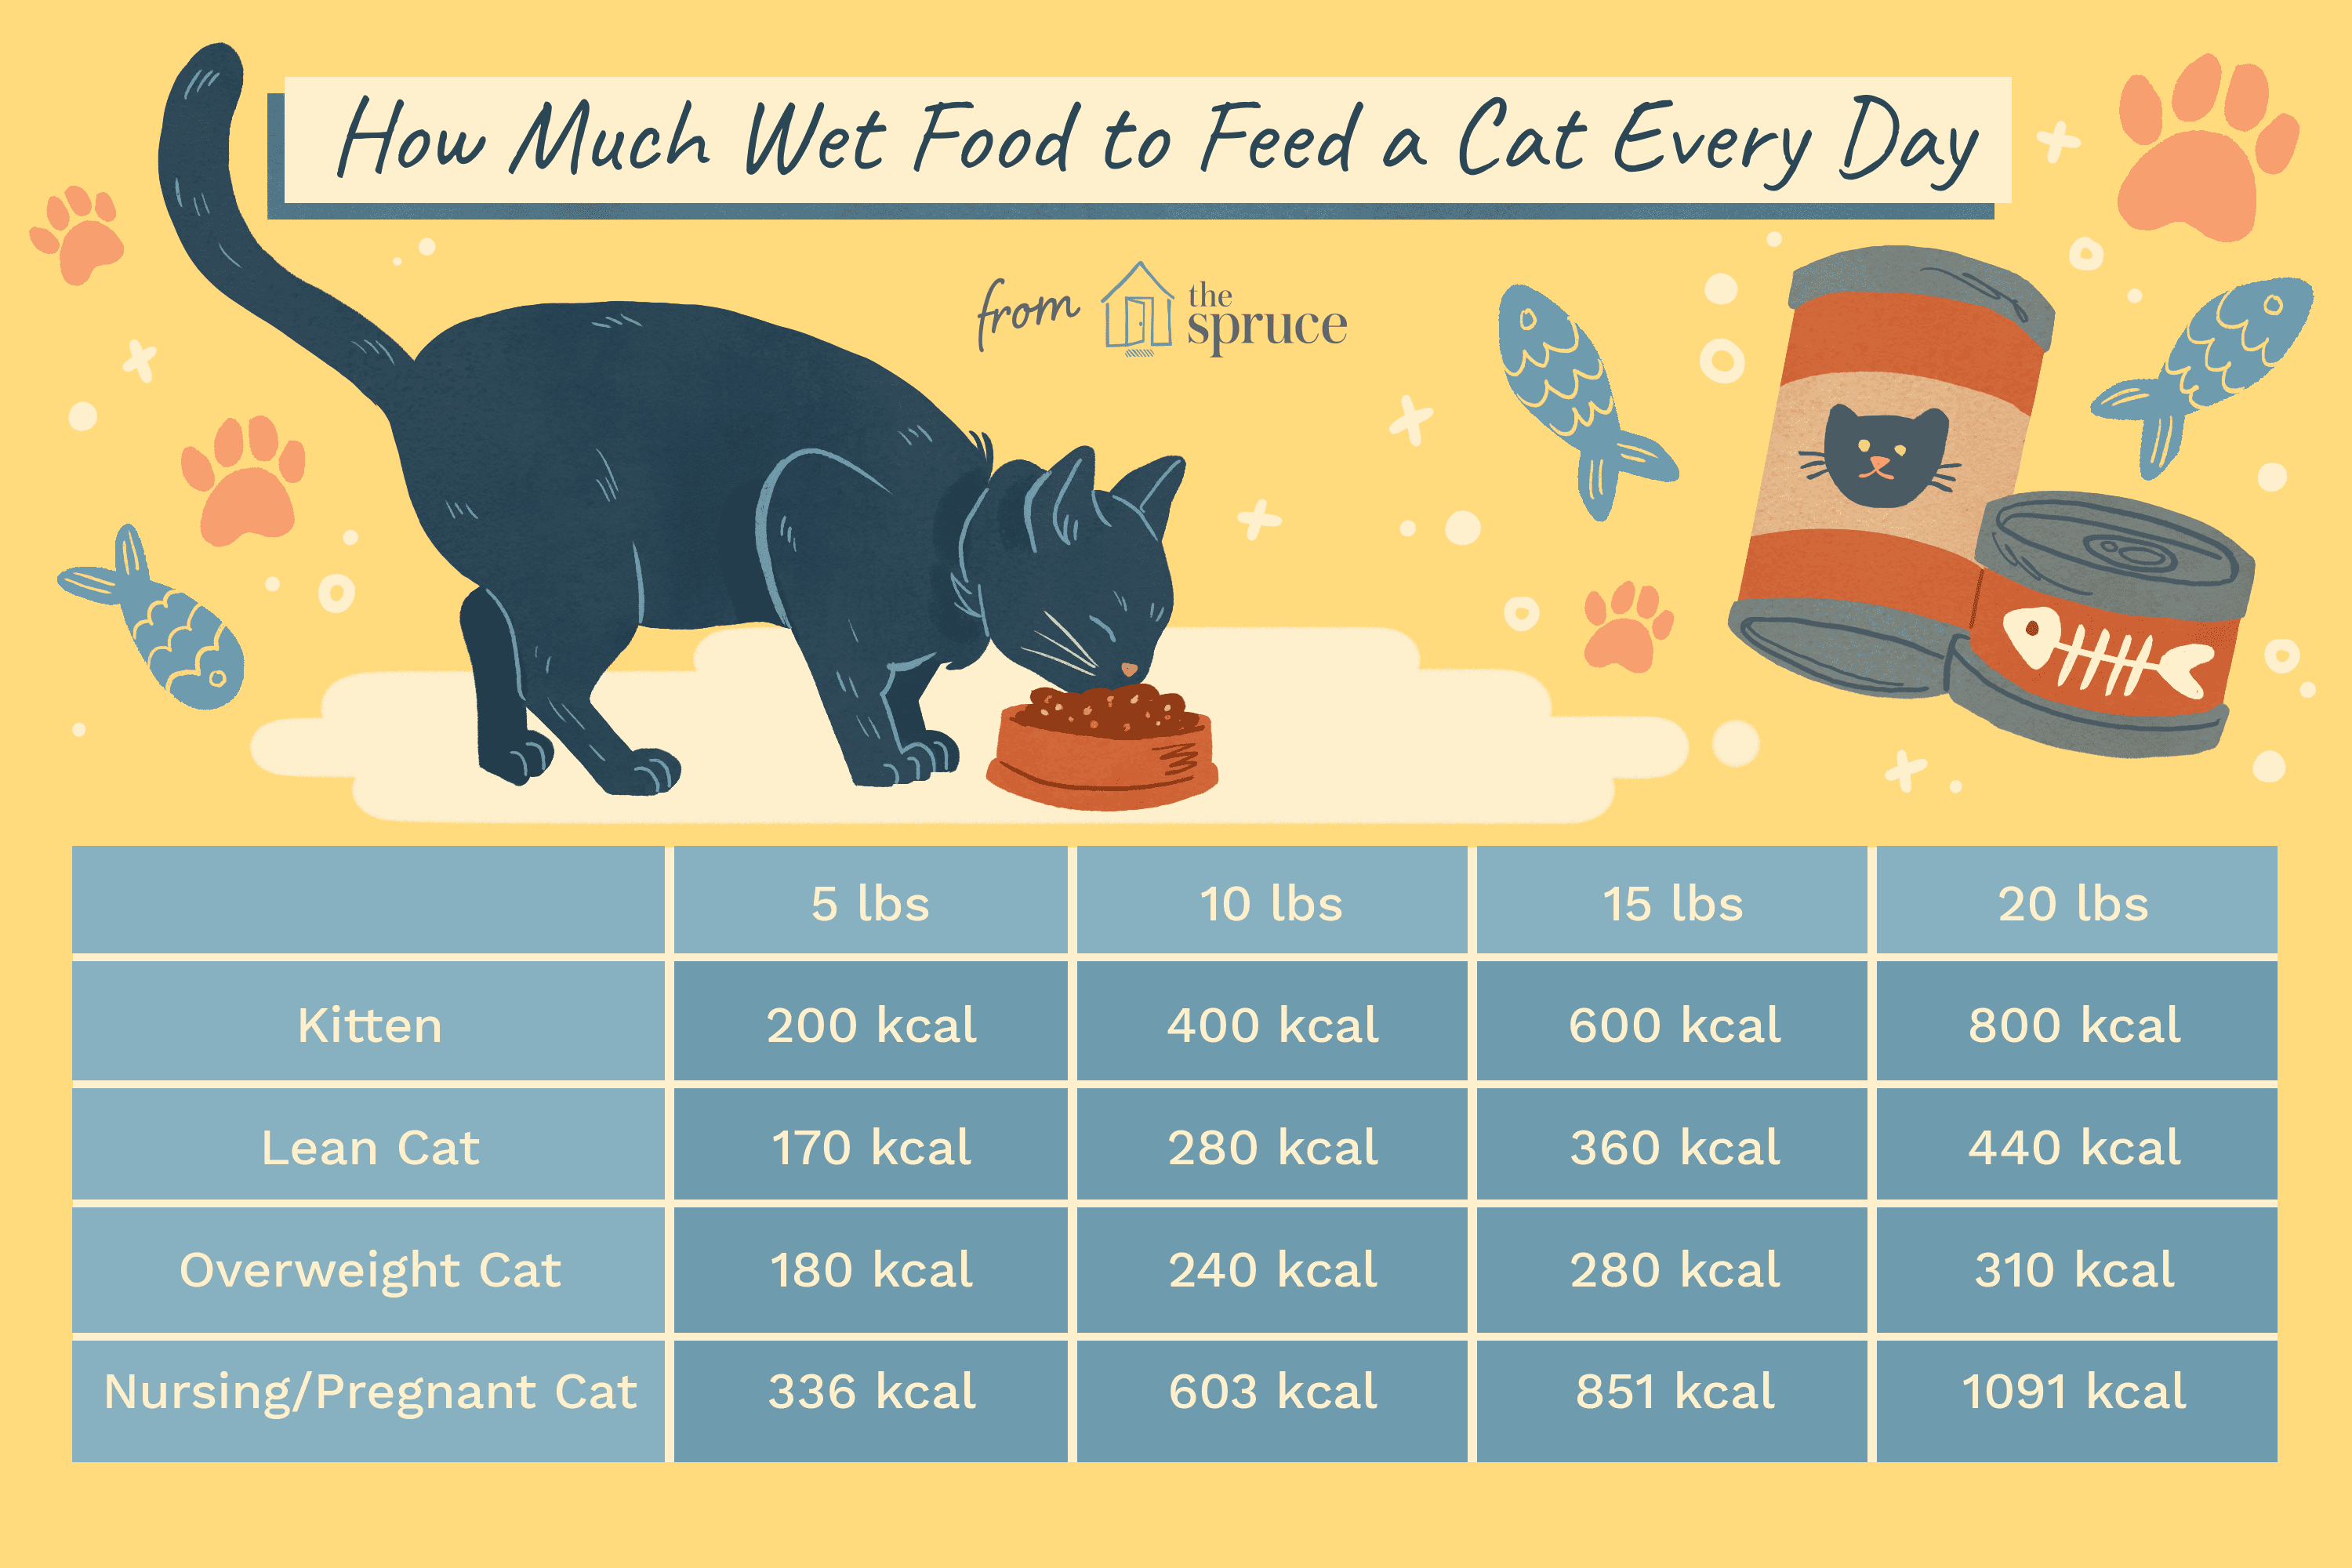 Chart describing how much wet food cats should have each day based on their weight.